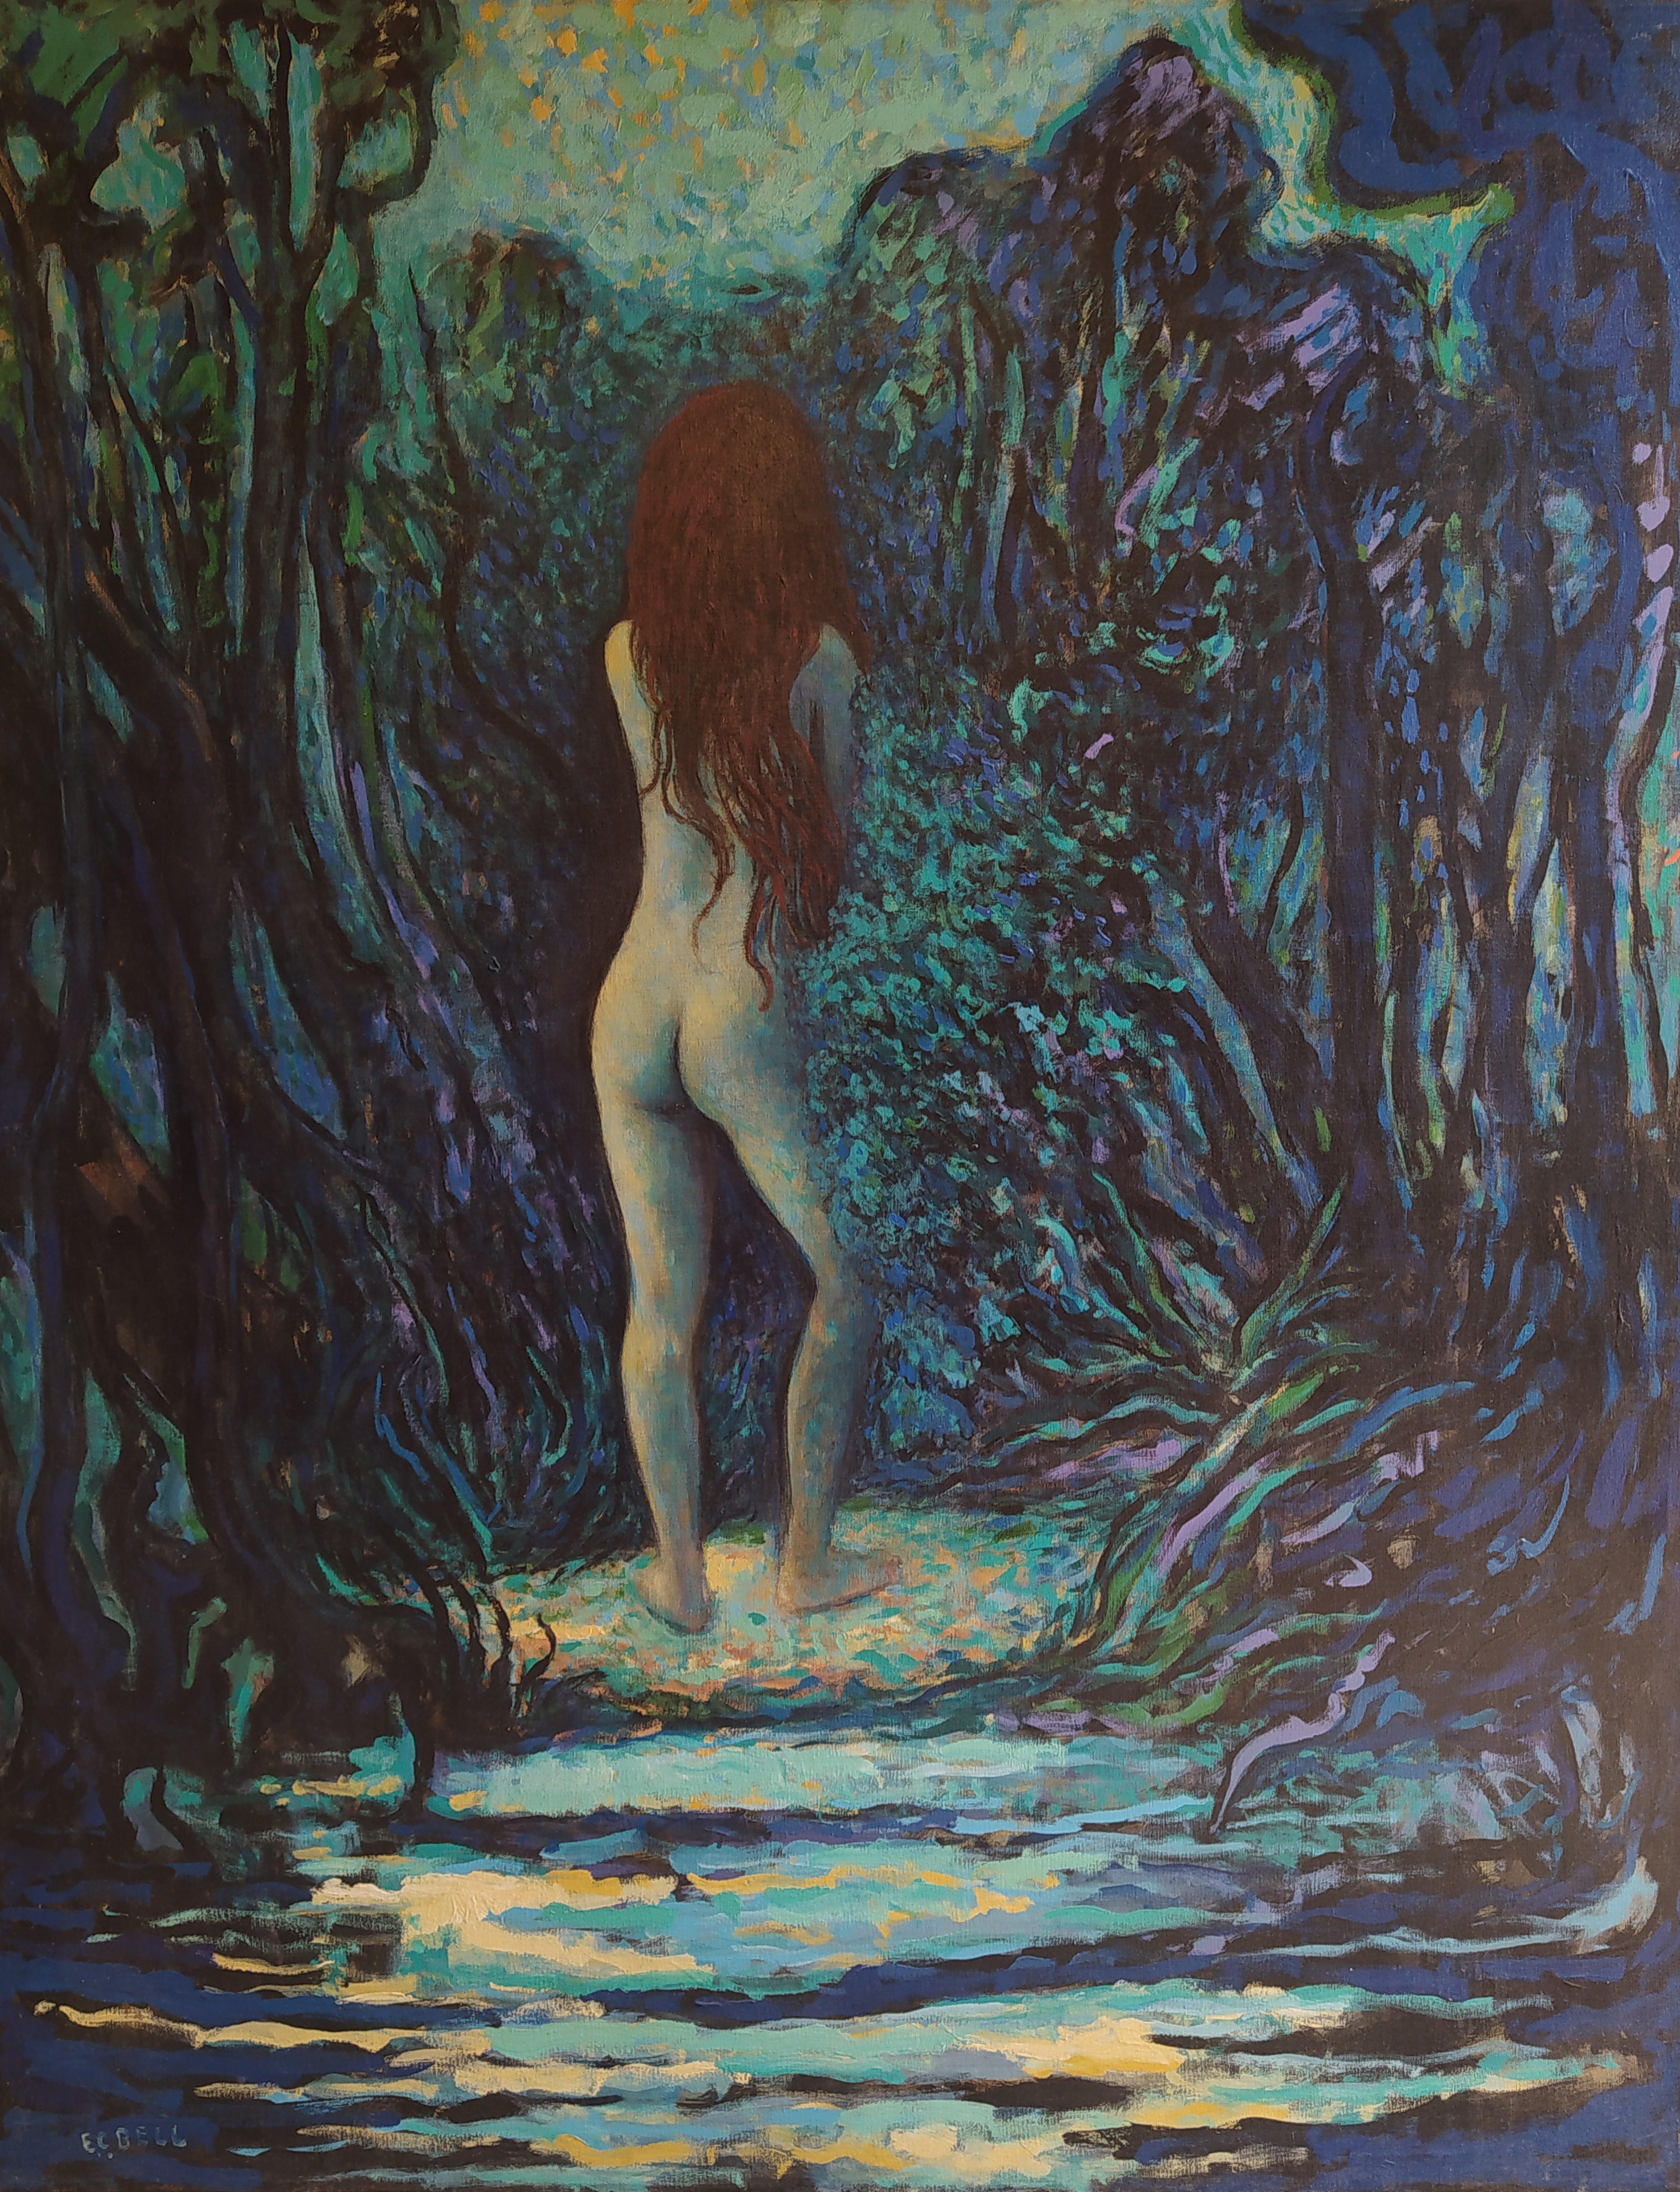 "Clearing" - Vertical expressionist landscape with nude, acrylic on canvas.